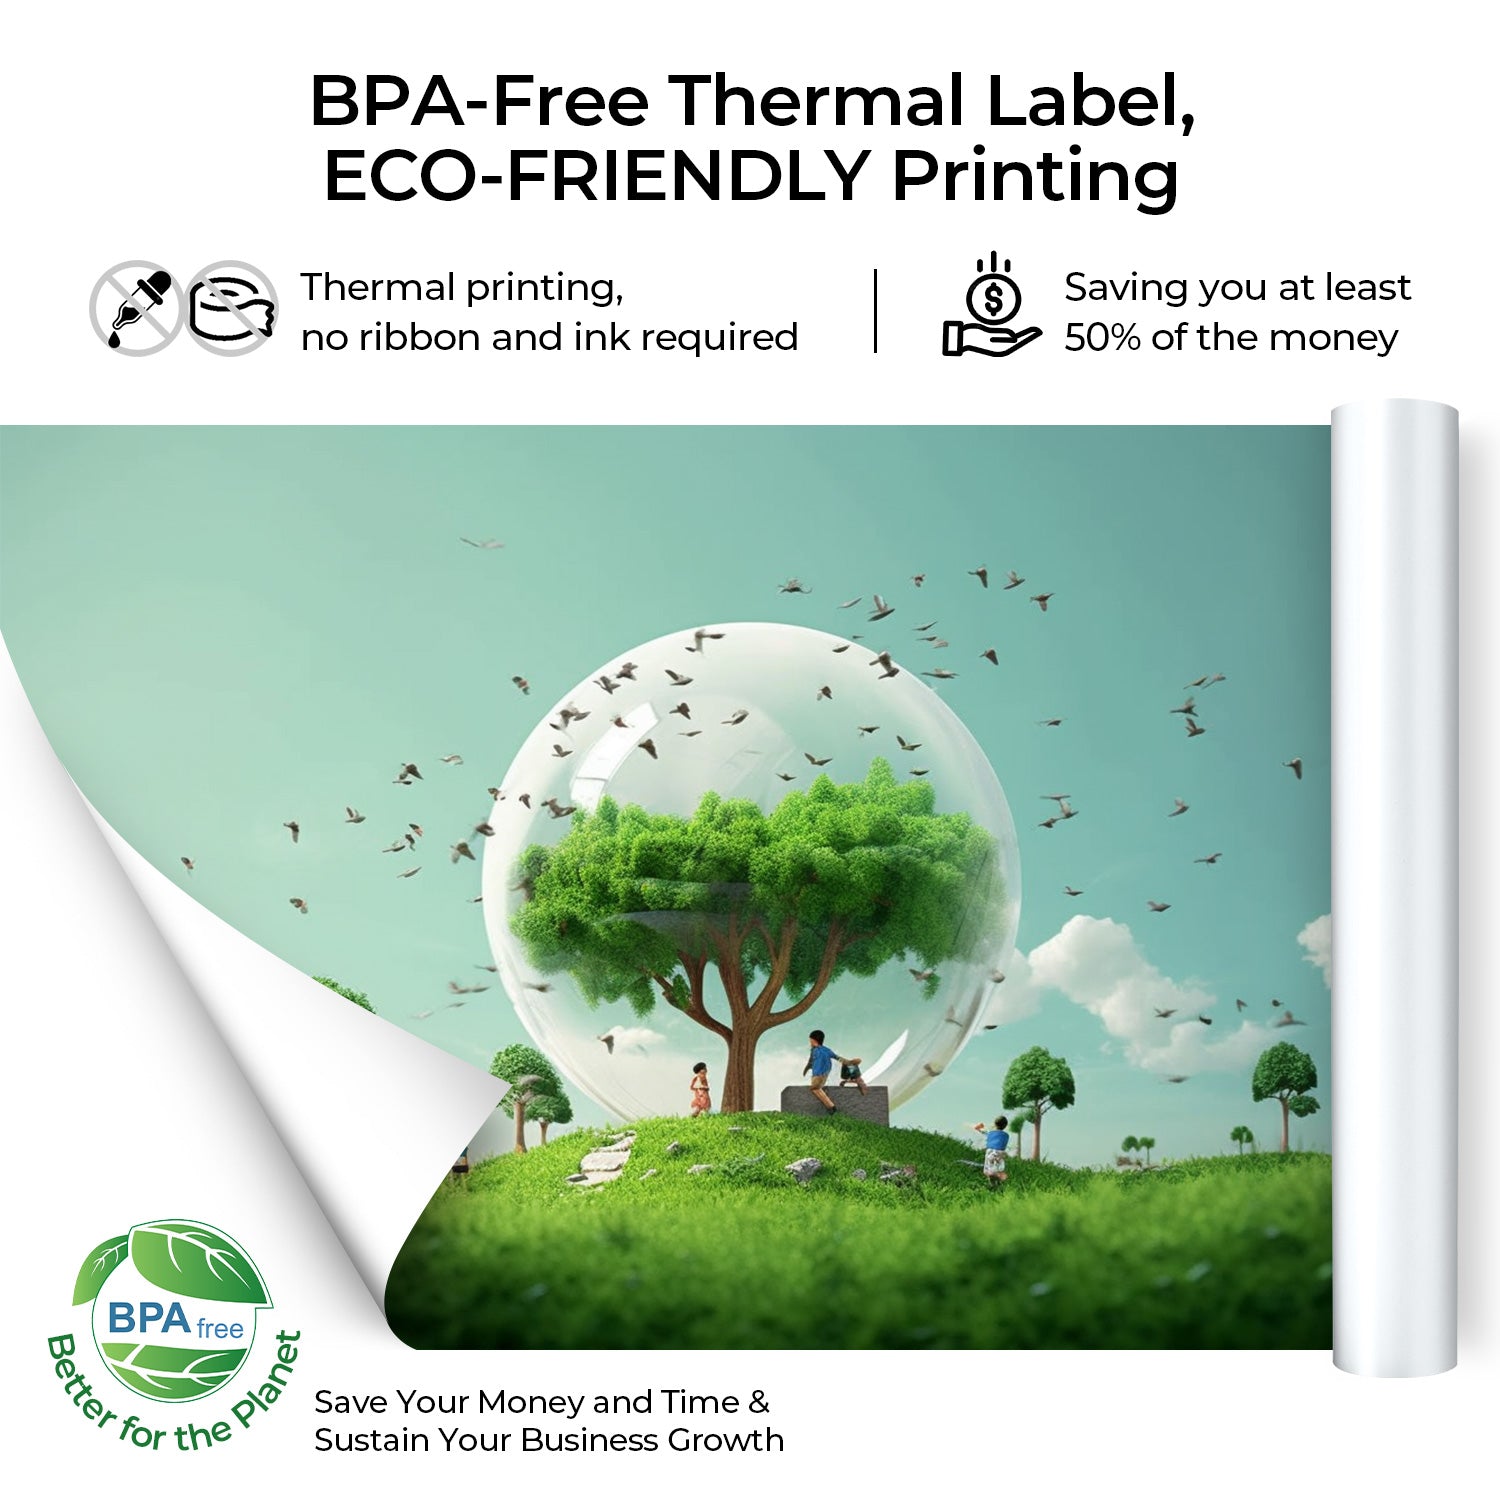 MUNBYN high-quality A4 paper rolls are BPS/BPA free, ensuring they are safe for both users and the environment. 